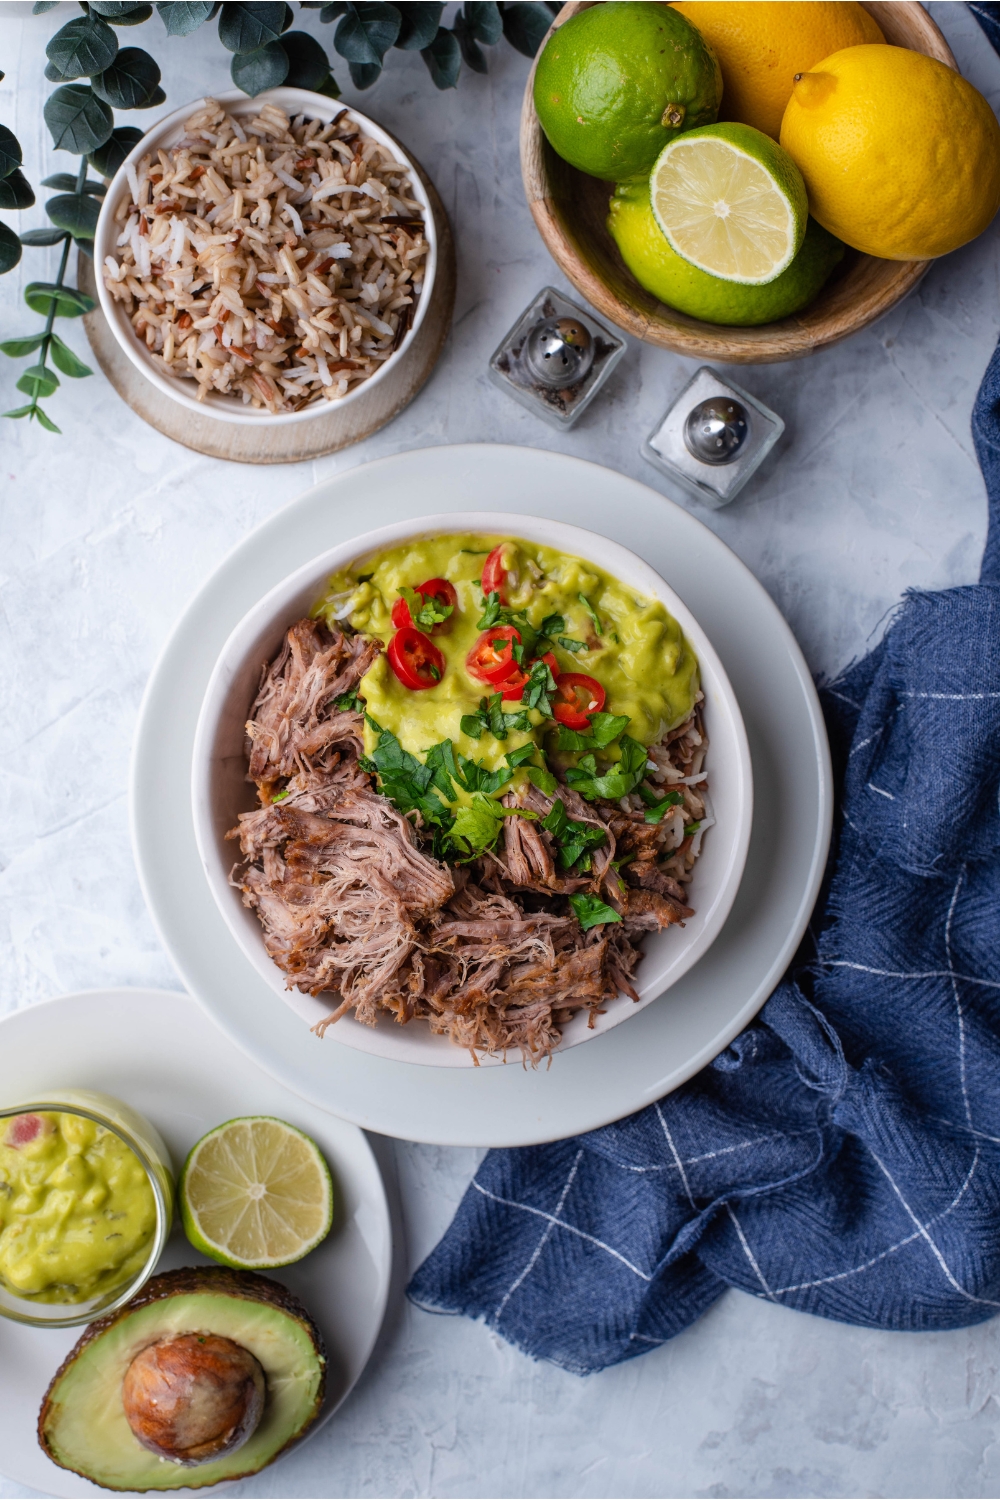 Overview of shredded barbacoa in a bowl with brown rice, sliced peppers, guacamole, and fresh herbs.